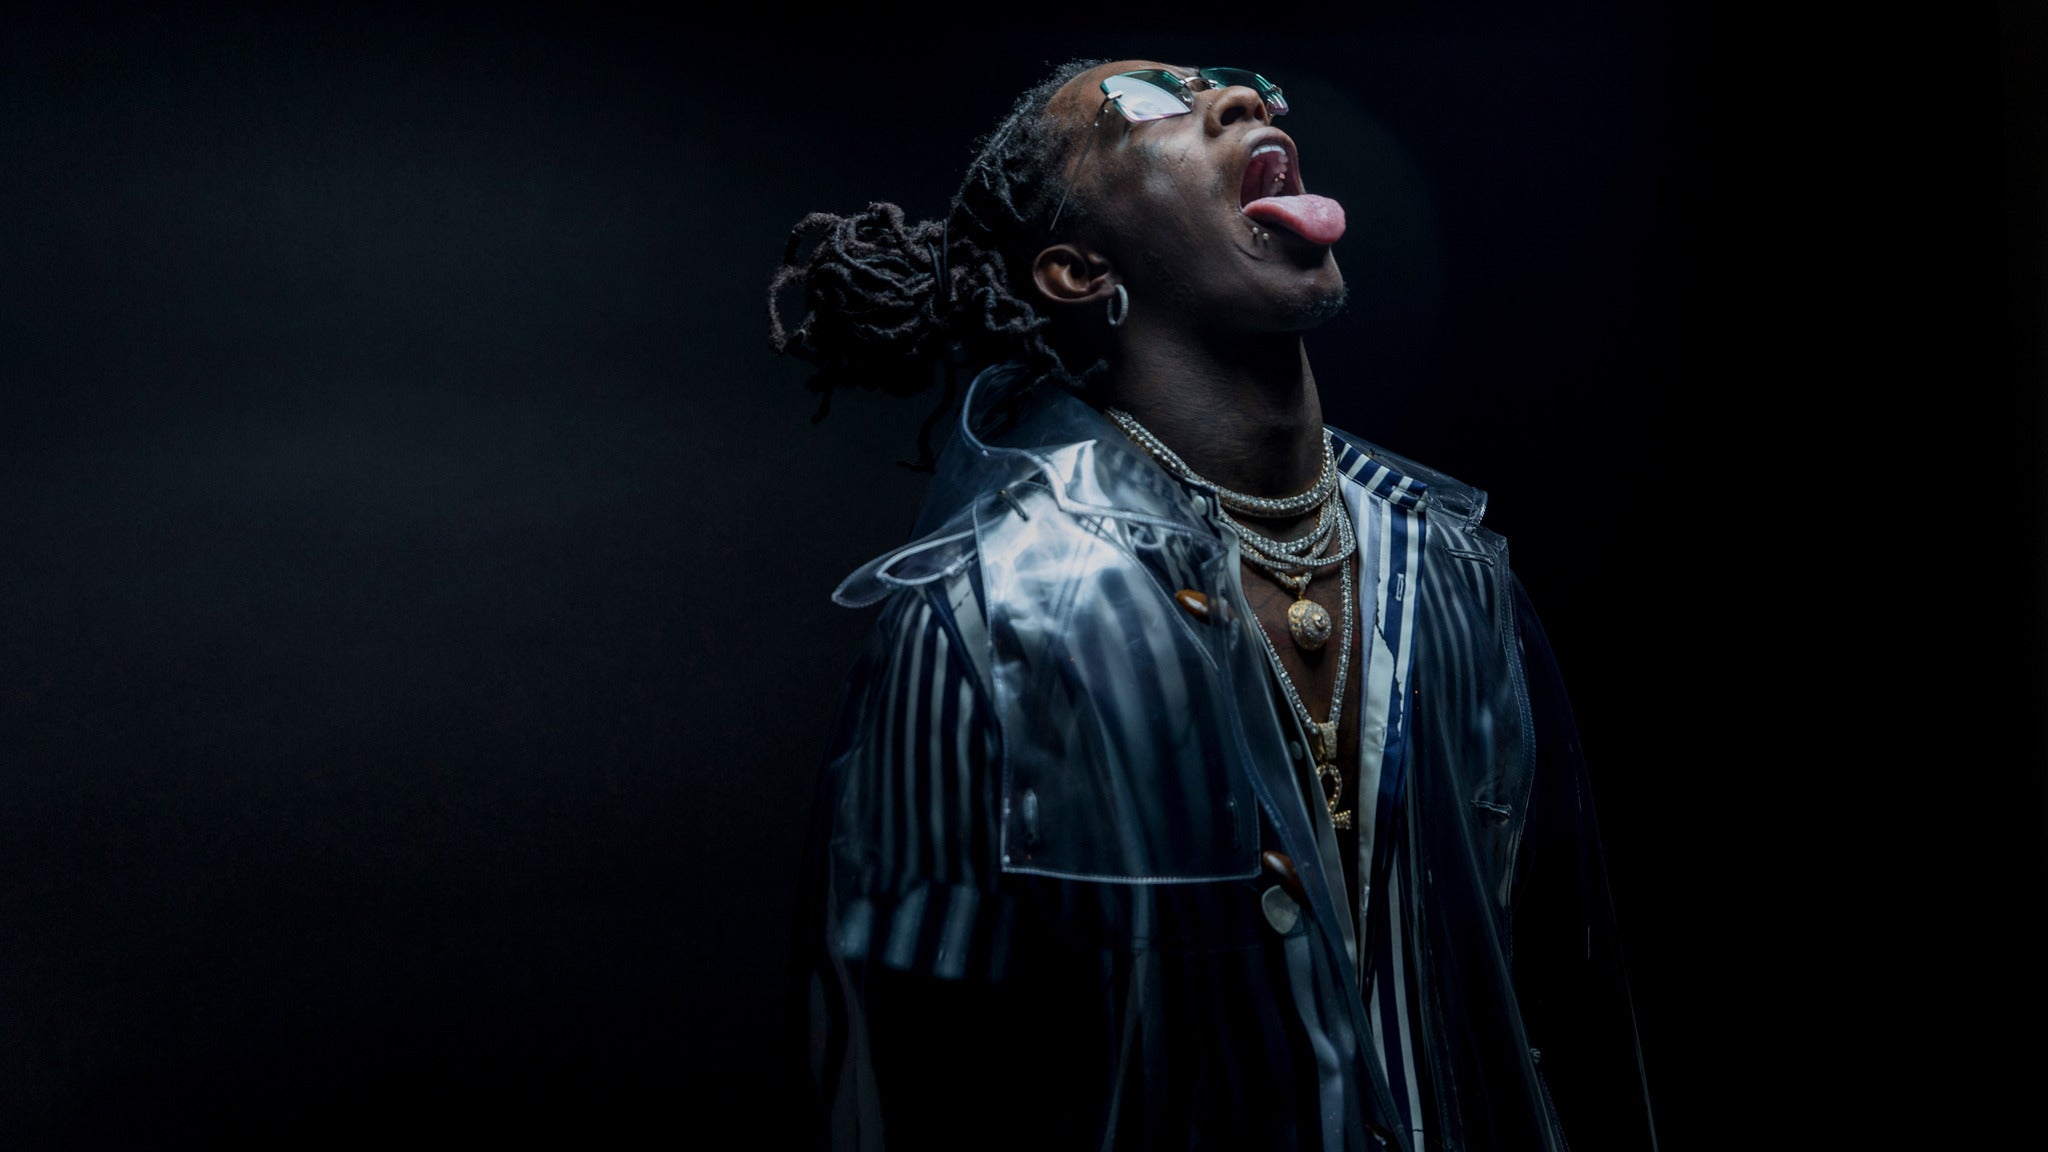 New Vice City: Broward Featuring Young Thug, Roddy Ricch & Kodak Black in Sunrise promo photo for Venue presale offer code